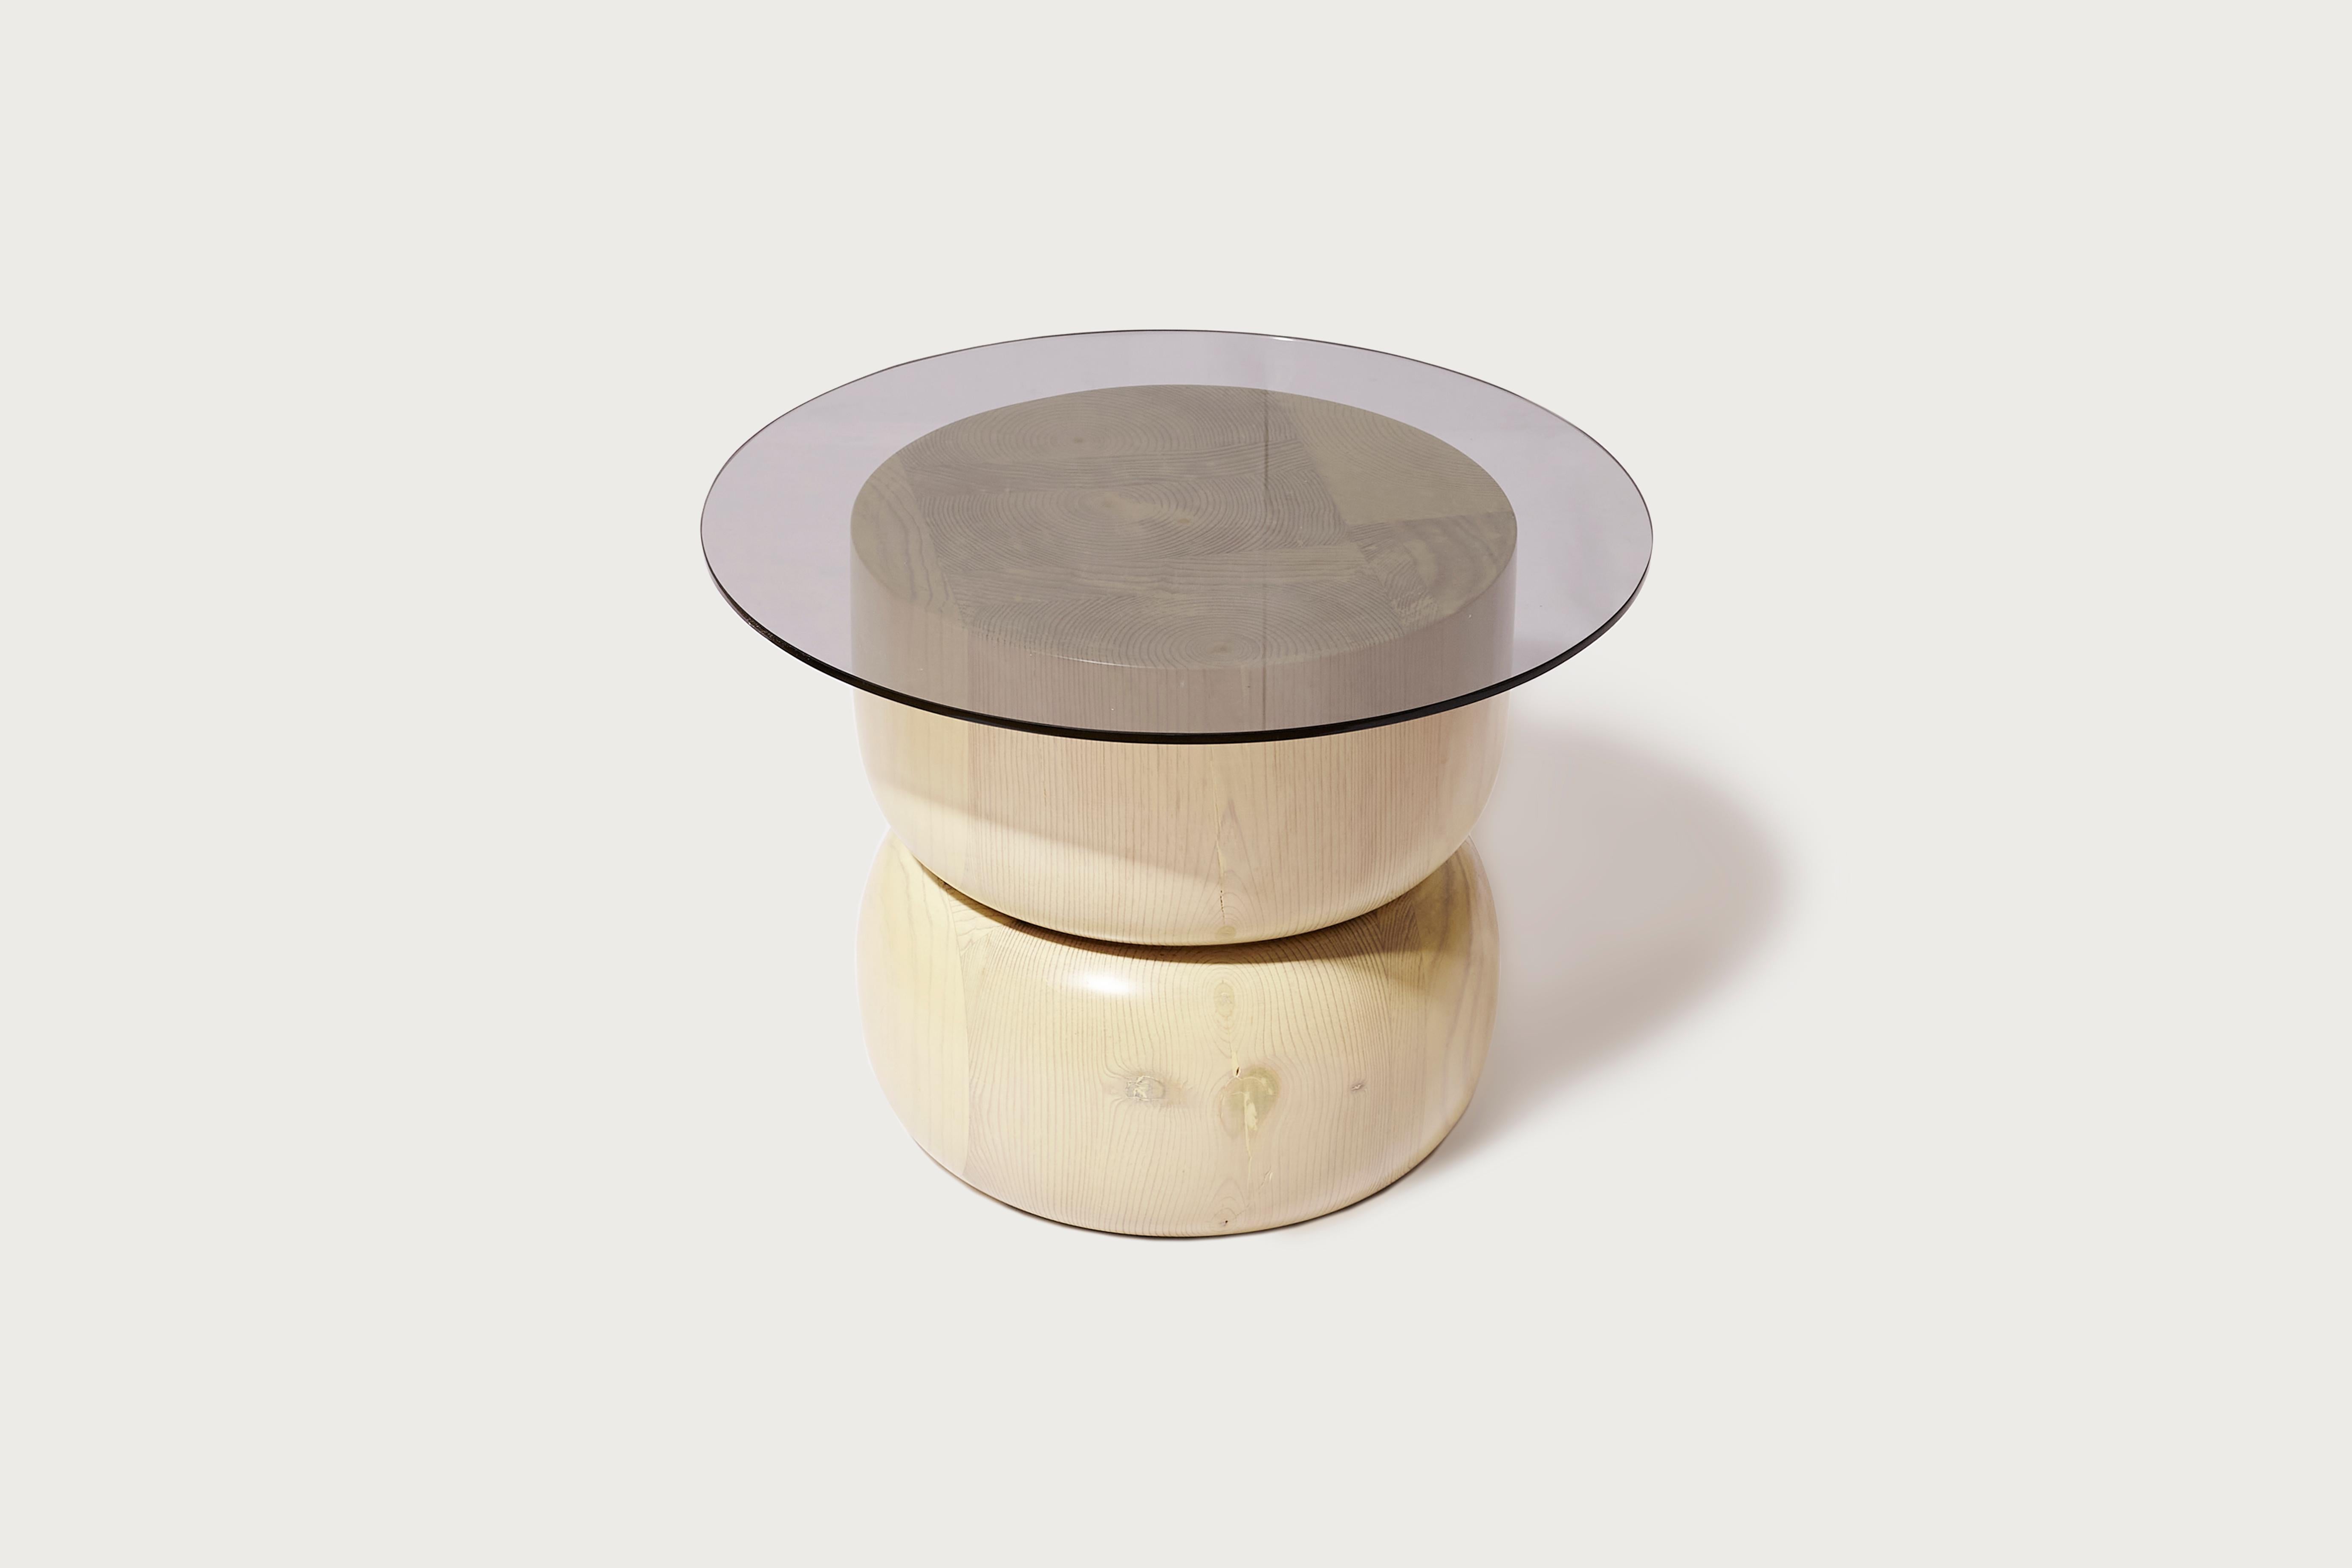 August opening side table stands as personal totem of sorts in ode to the blossoming of fungi. With a refined expression the object remits at once to modernist and primal sculptural-architectural language that celebrates connections with the natural